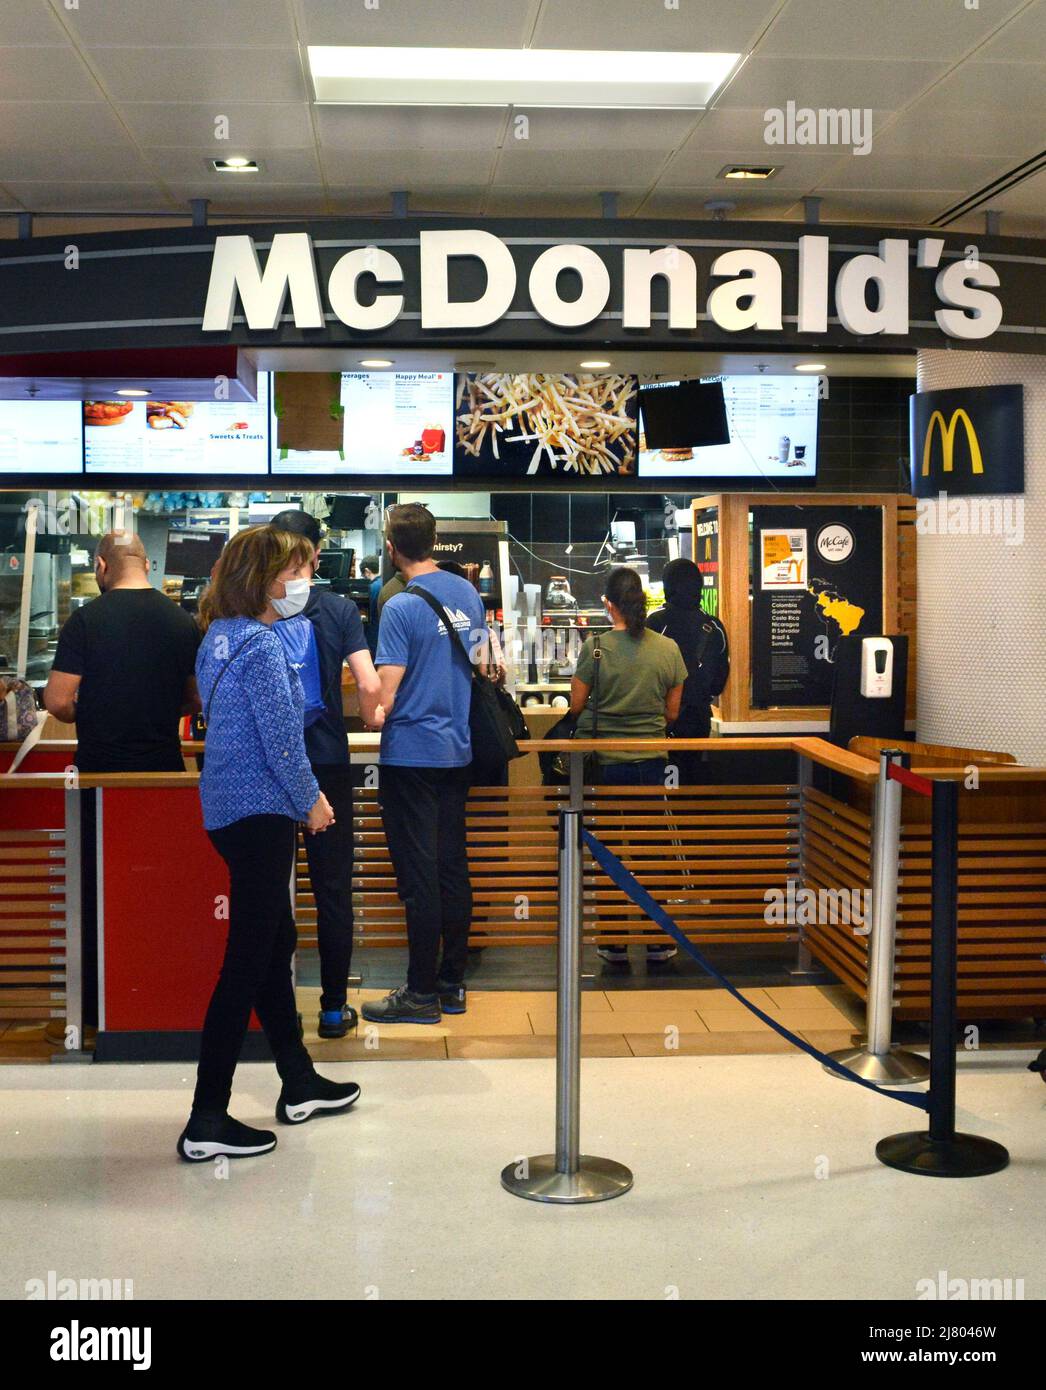 Customers purchase food at a McDonald's fast food restaurant in the terminal at Phoenix Sky Harbor International Airport in Phoenix, Arizona. Stock Photo